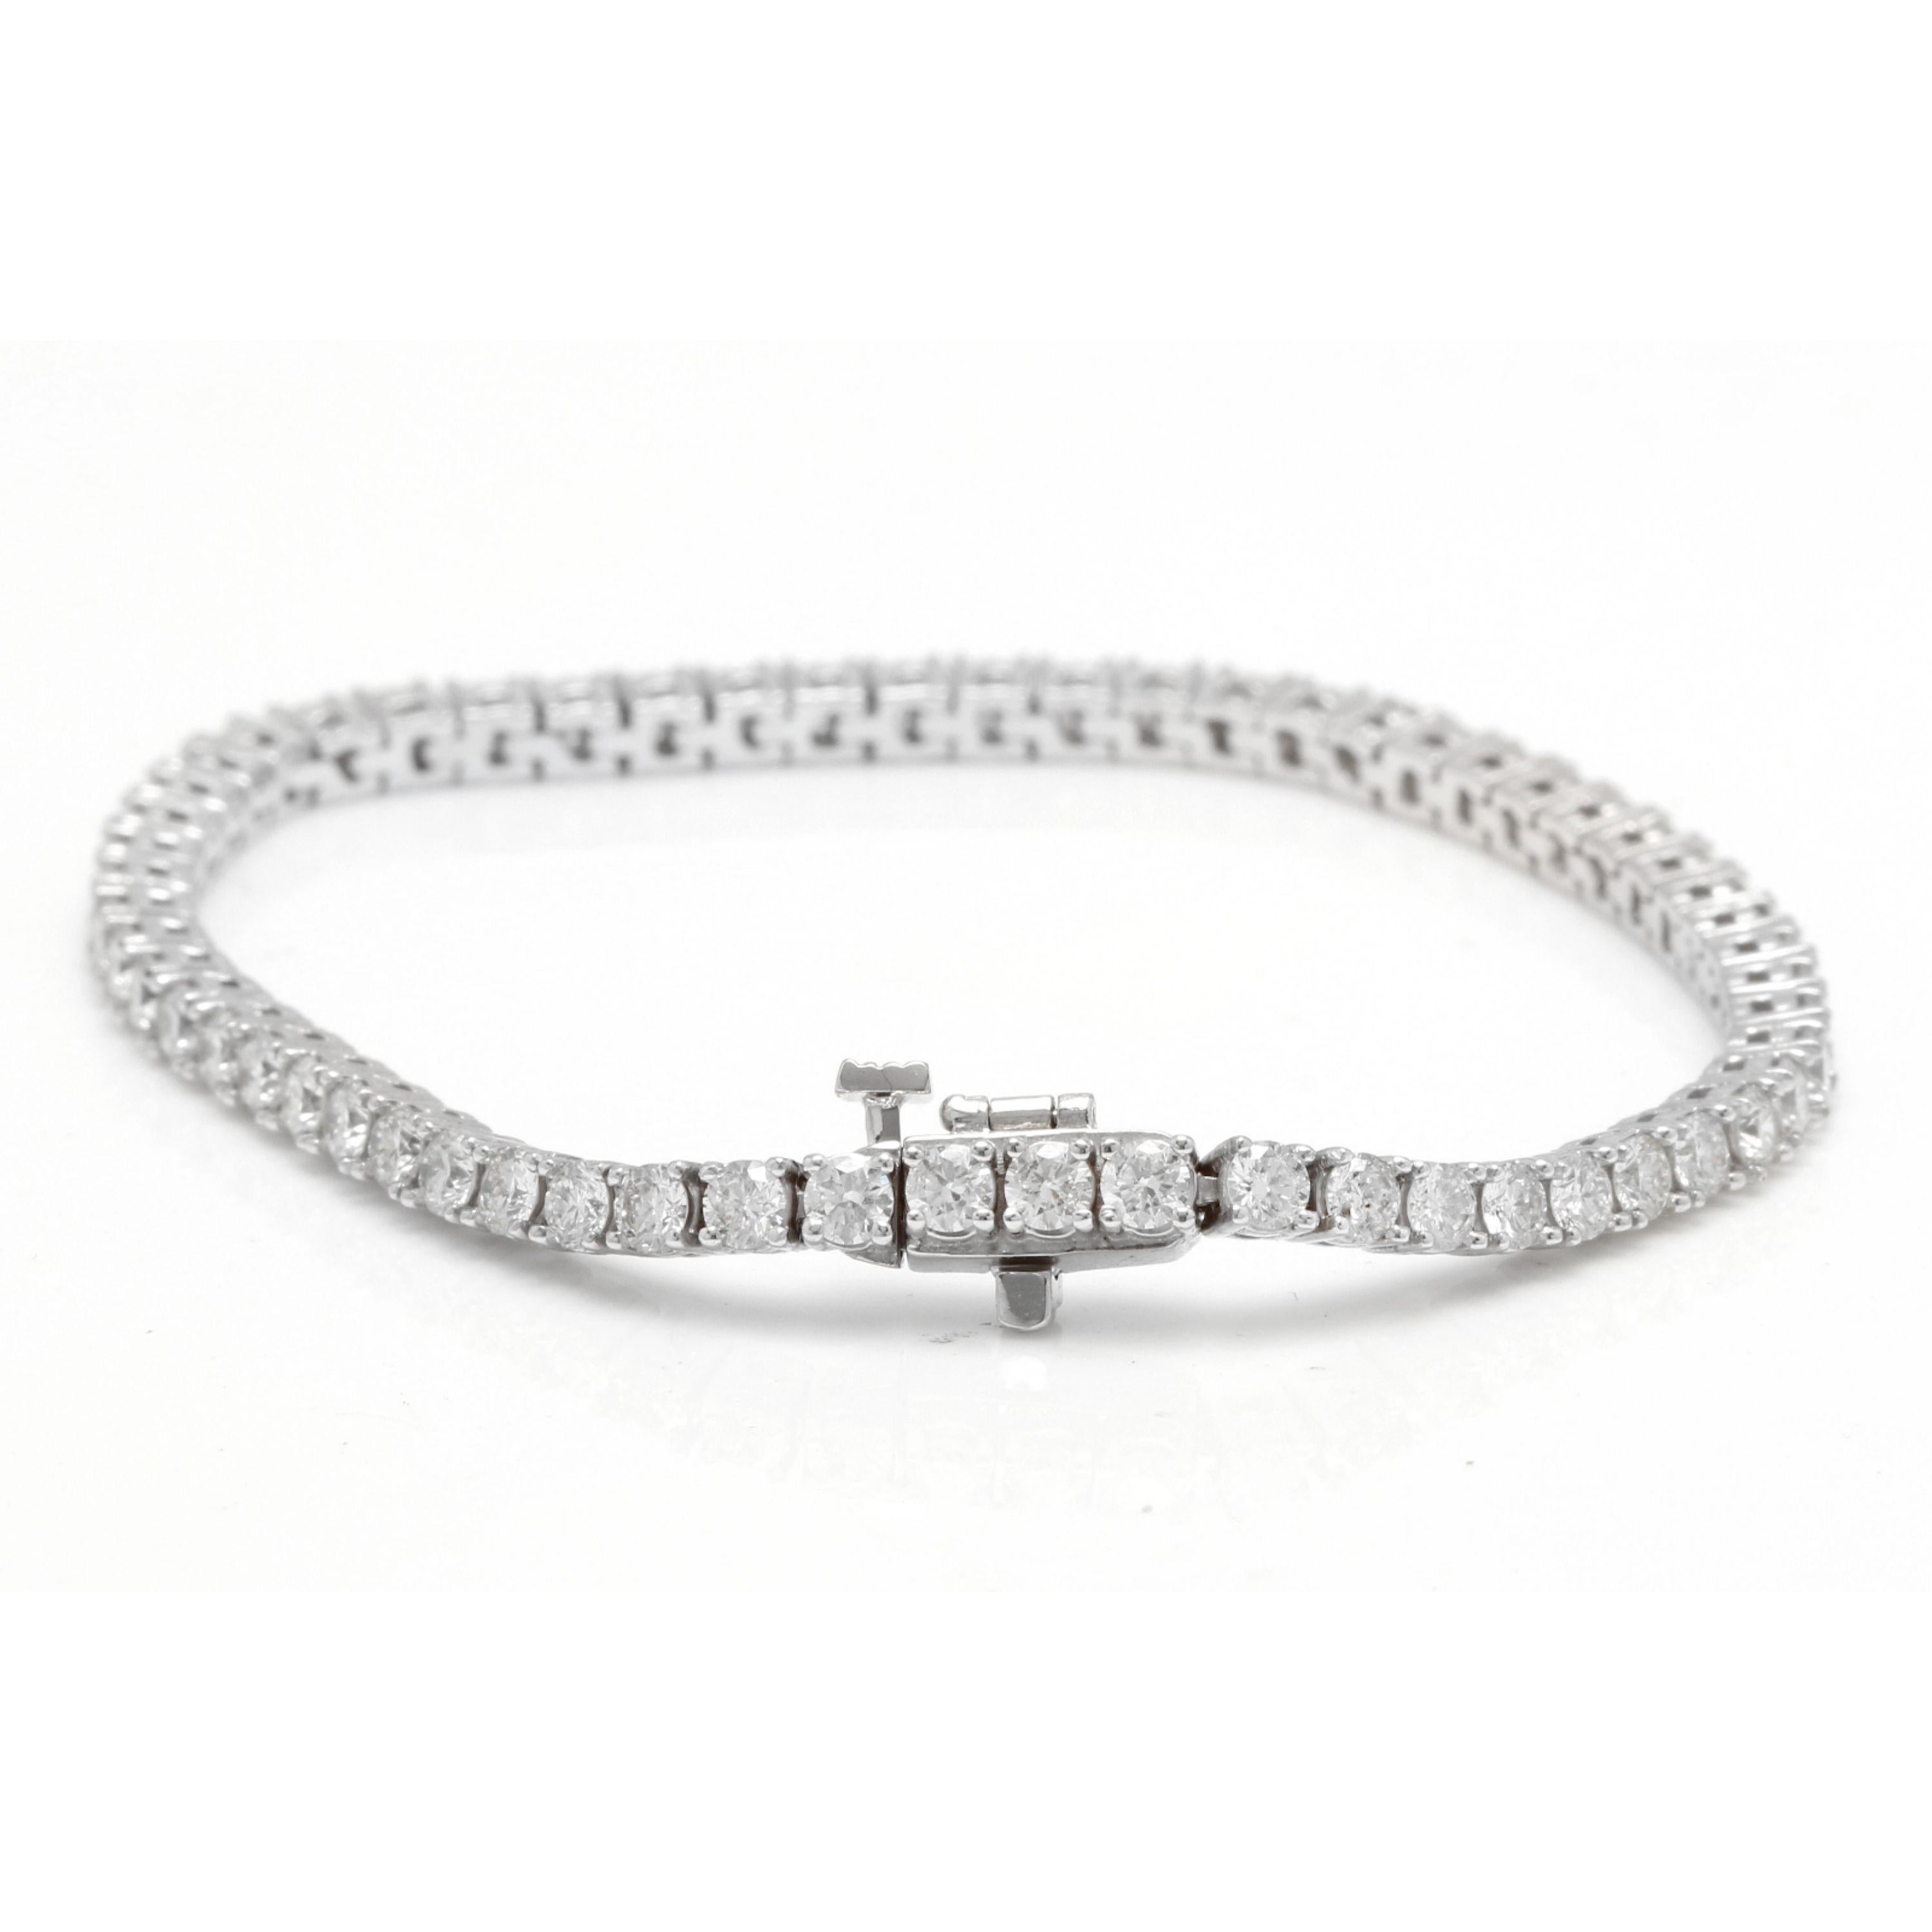 Very Impressive 4.70 Carats Natural Diamond 14K Solid White Gold Bracelet

STAMPED: 14K

Total Natural Round Diamonds Weight: Approx. 4.70 Carats (color H-I / Clarity SI1-SI2)

Bangle Wrist Size is: 7 inches

Width: Approx. 2.98mm

Bracelet total